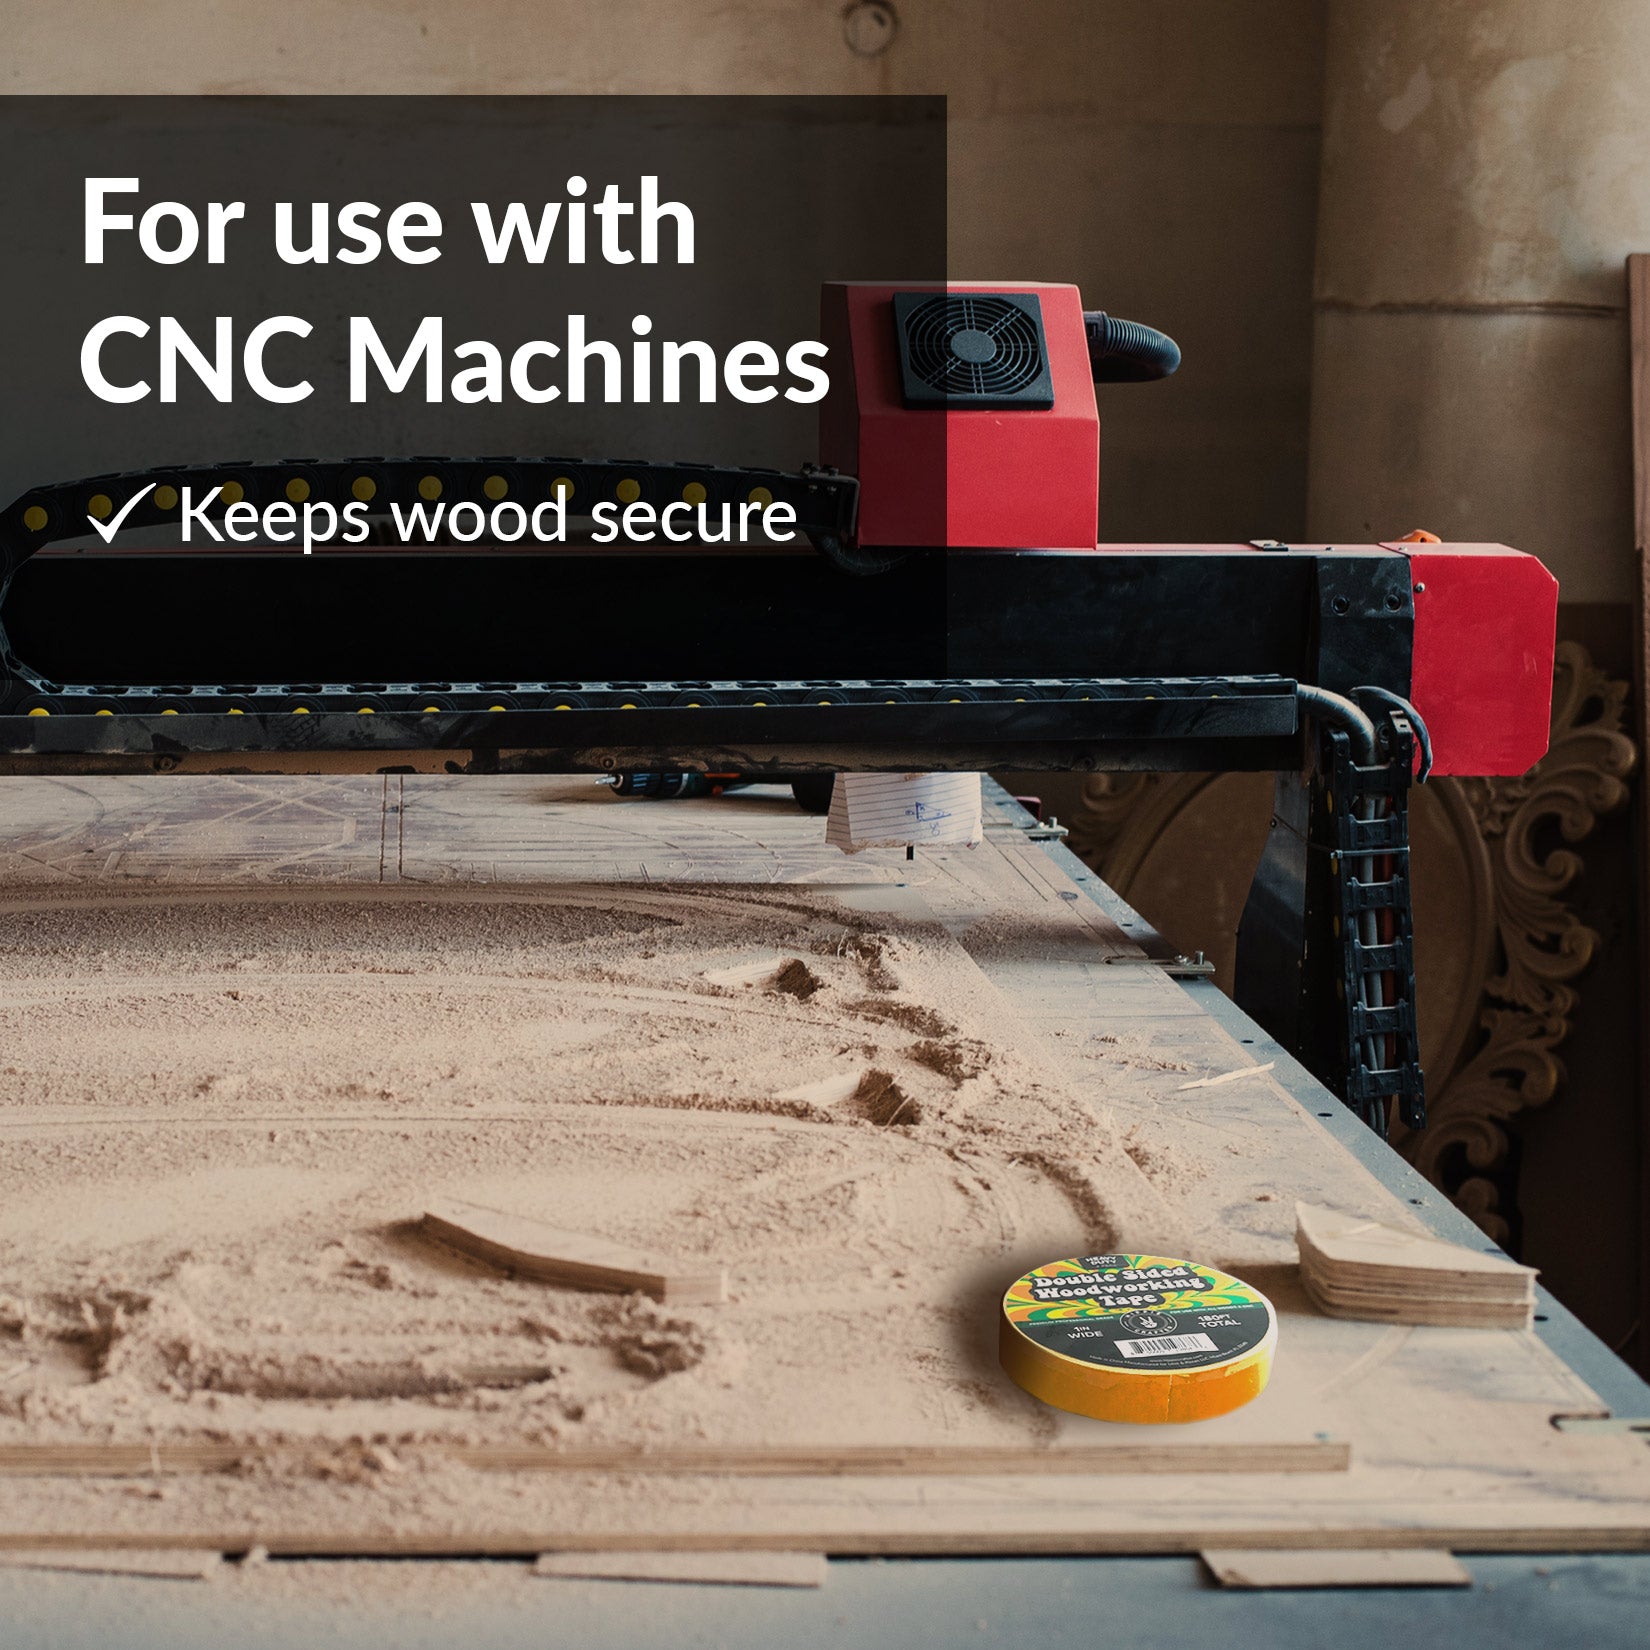 CNC Machining, What Double Sided Tape do you use